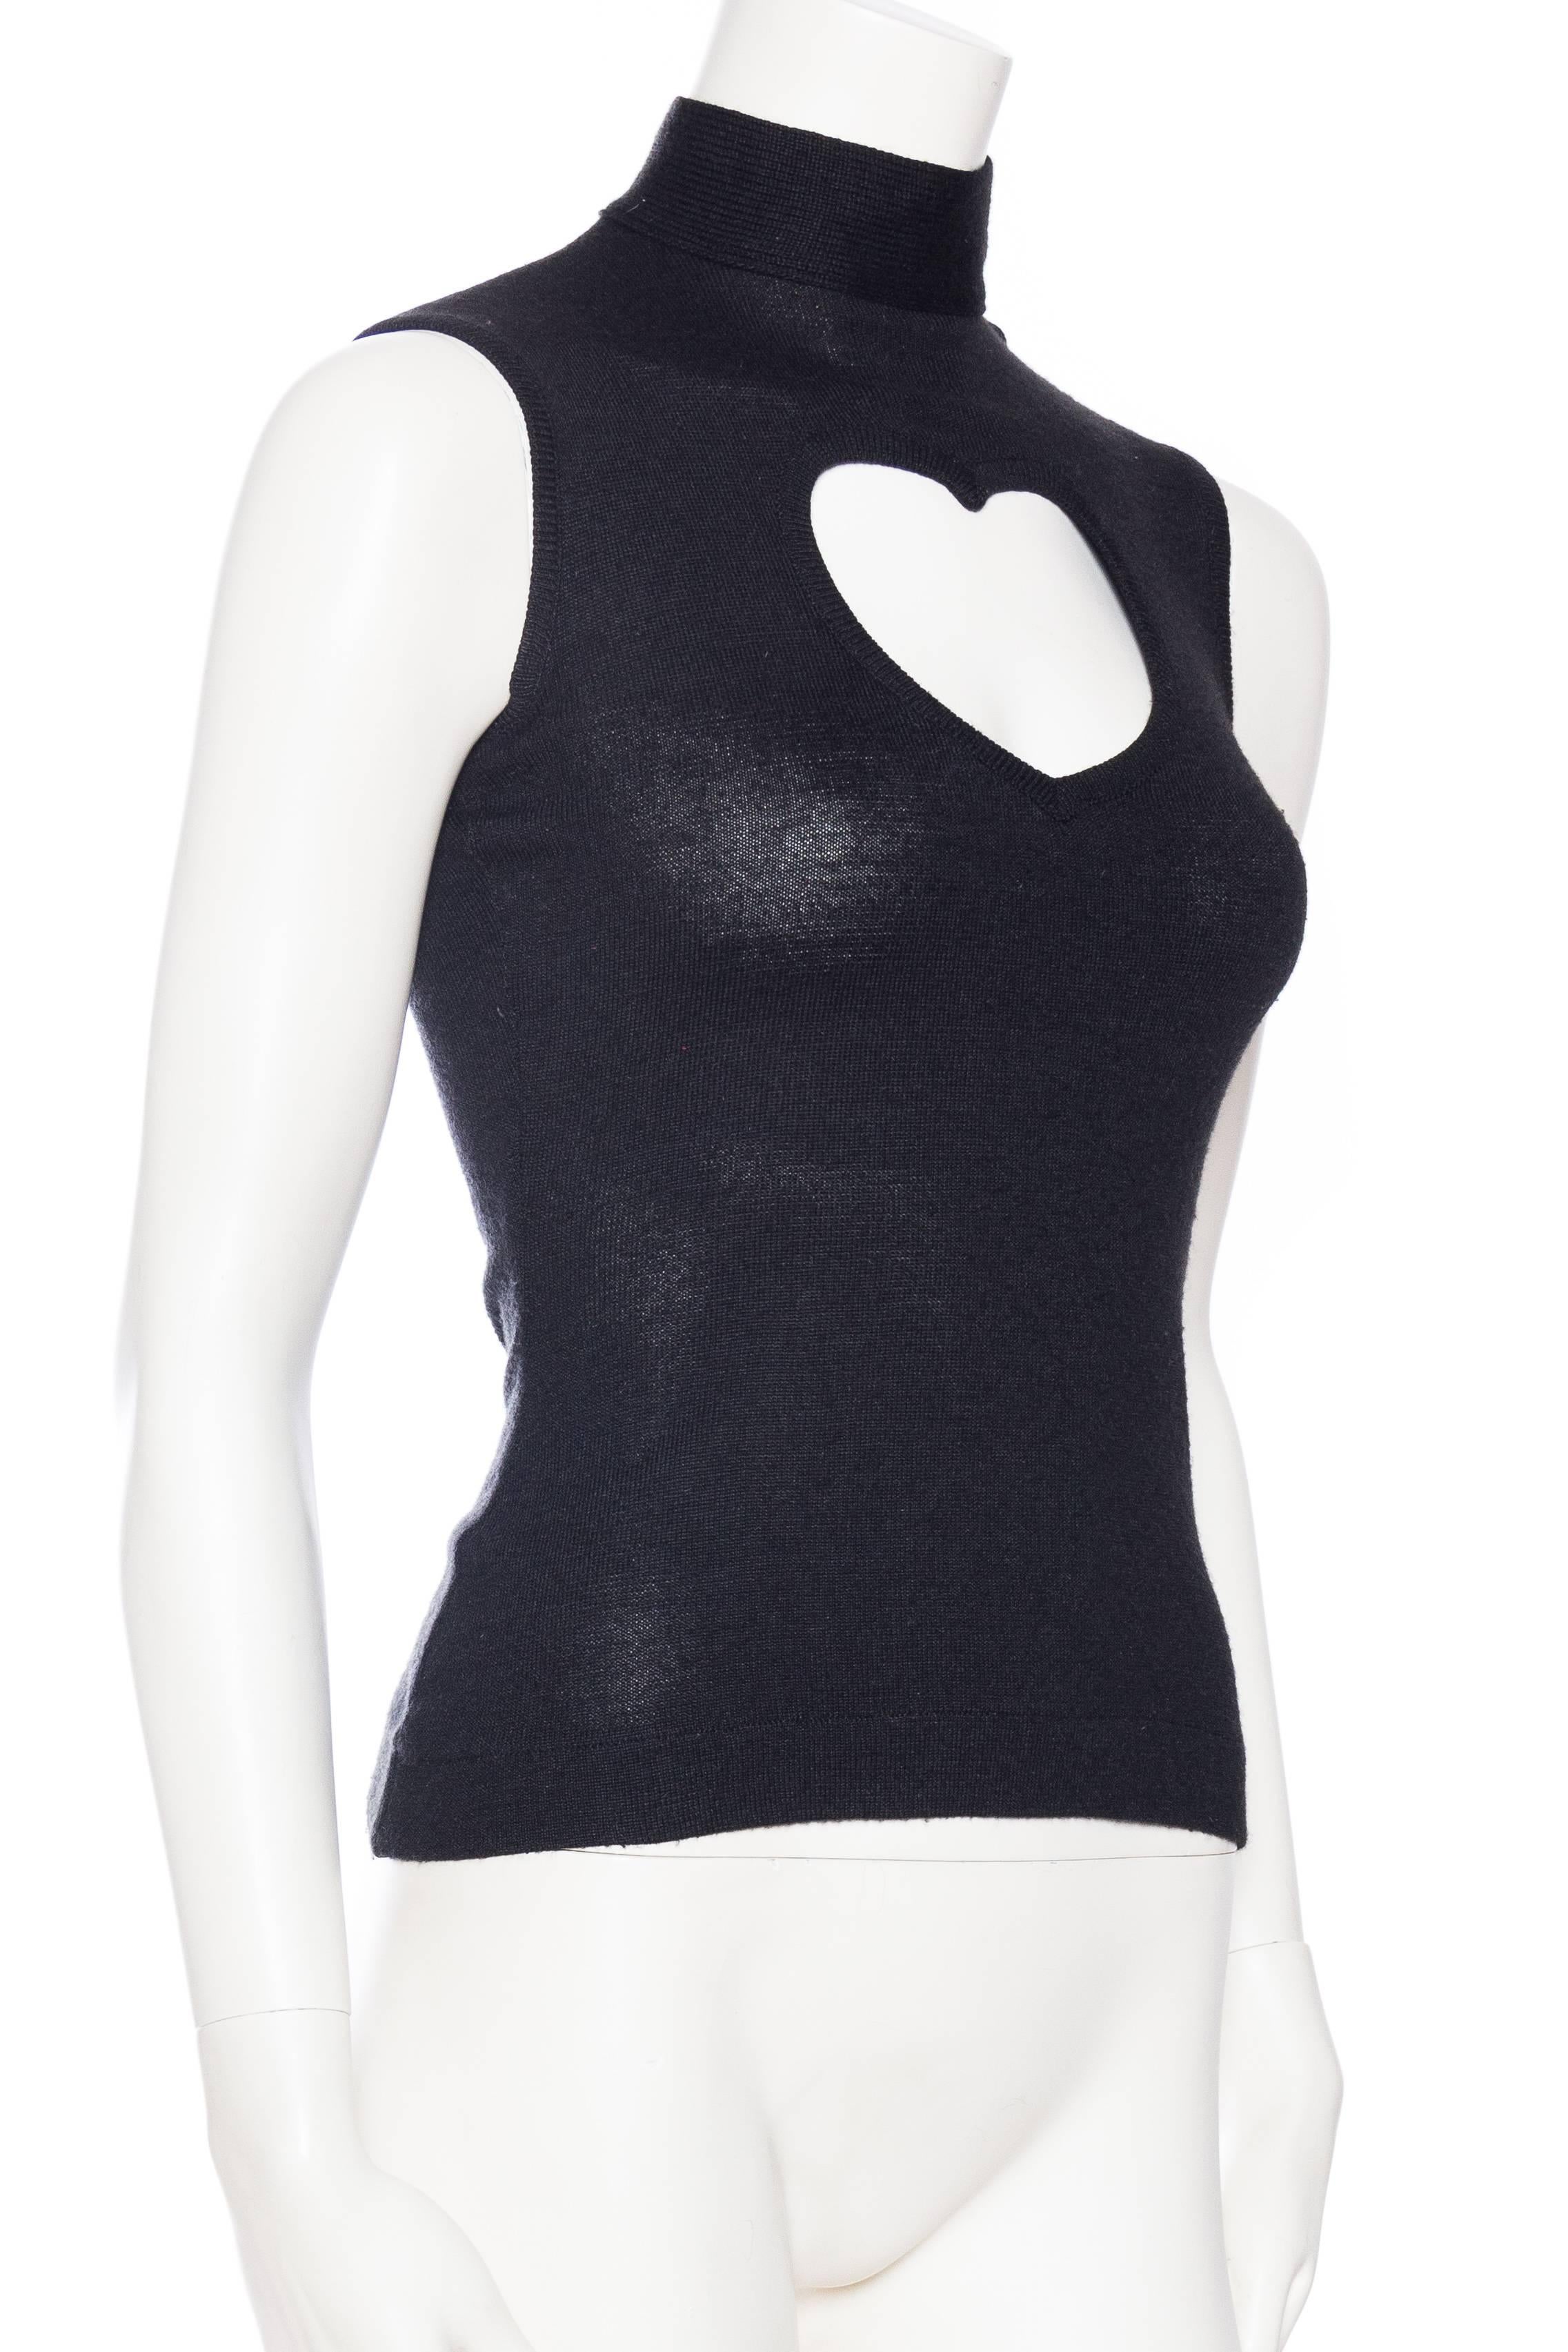 heart cut out top